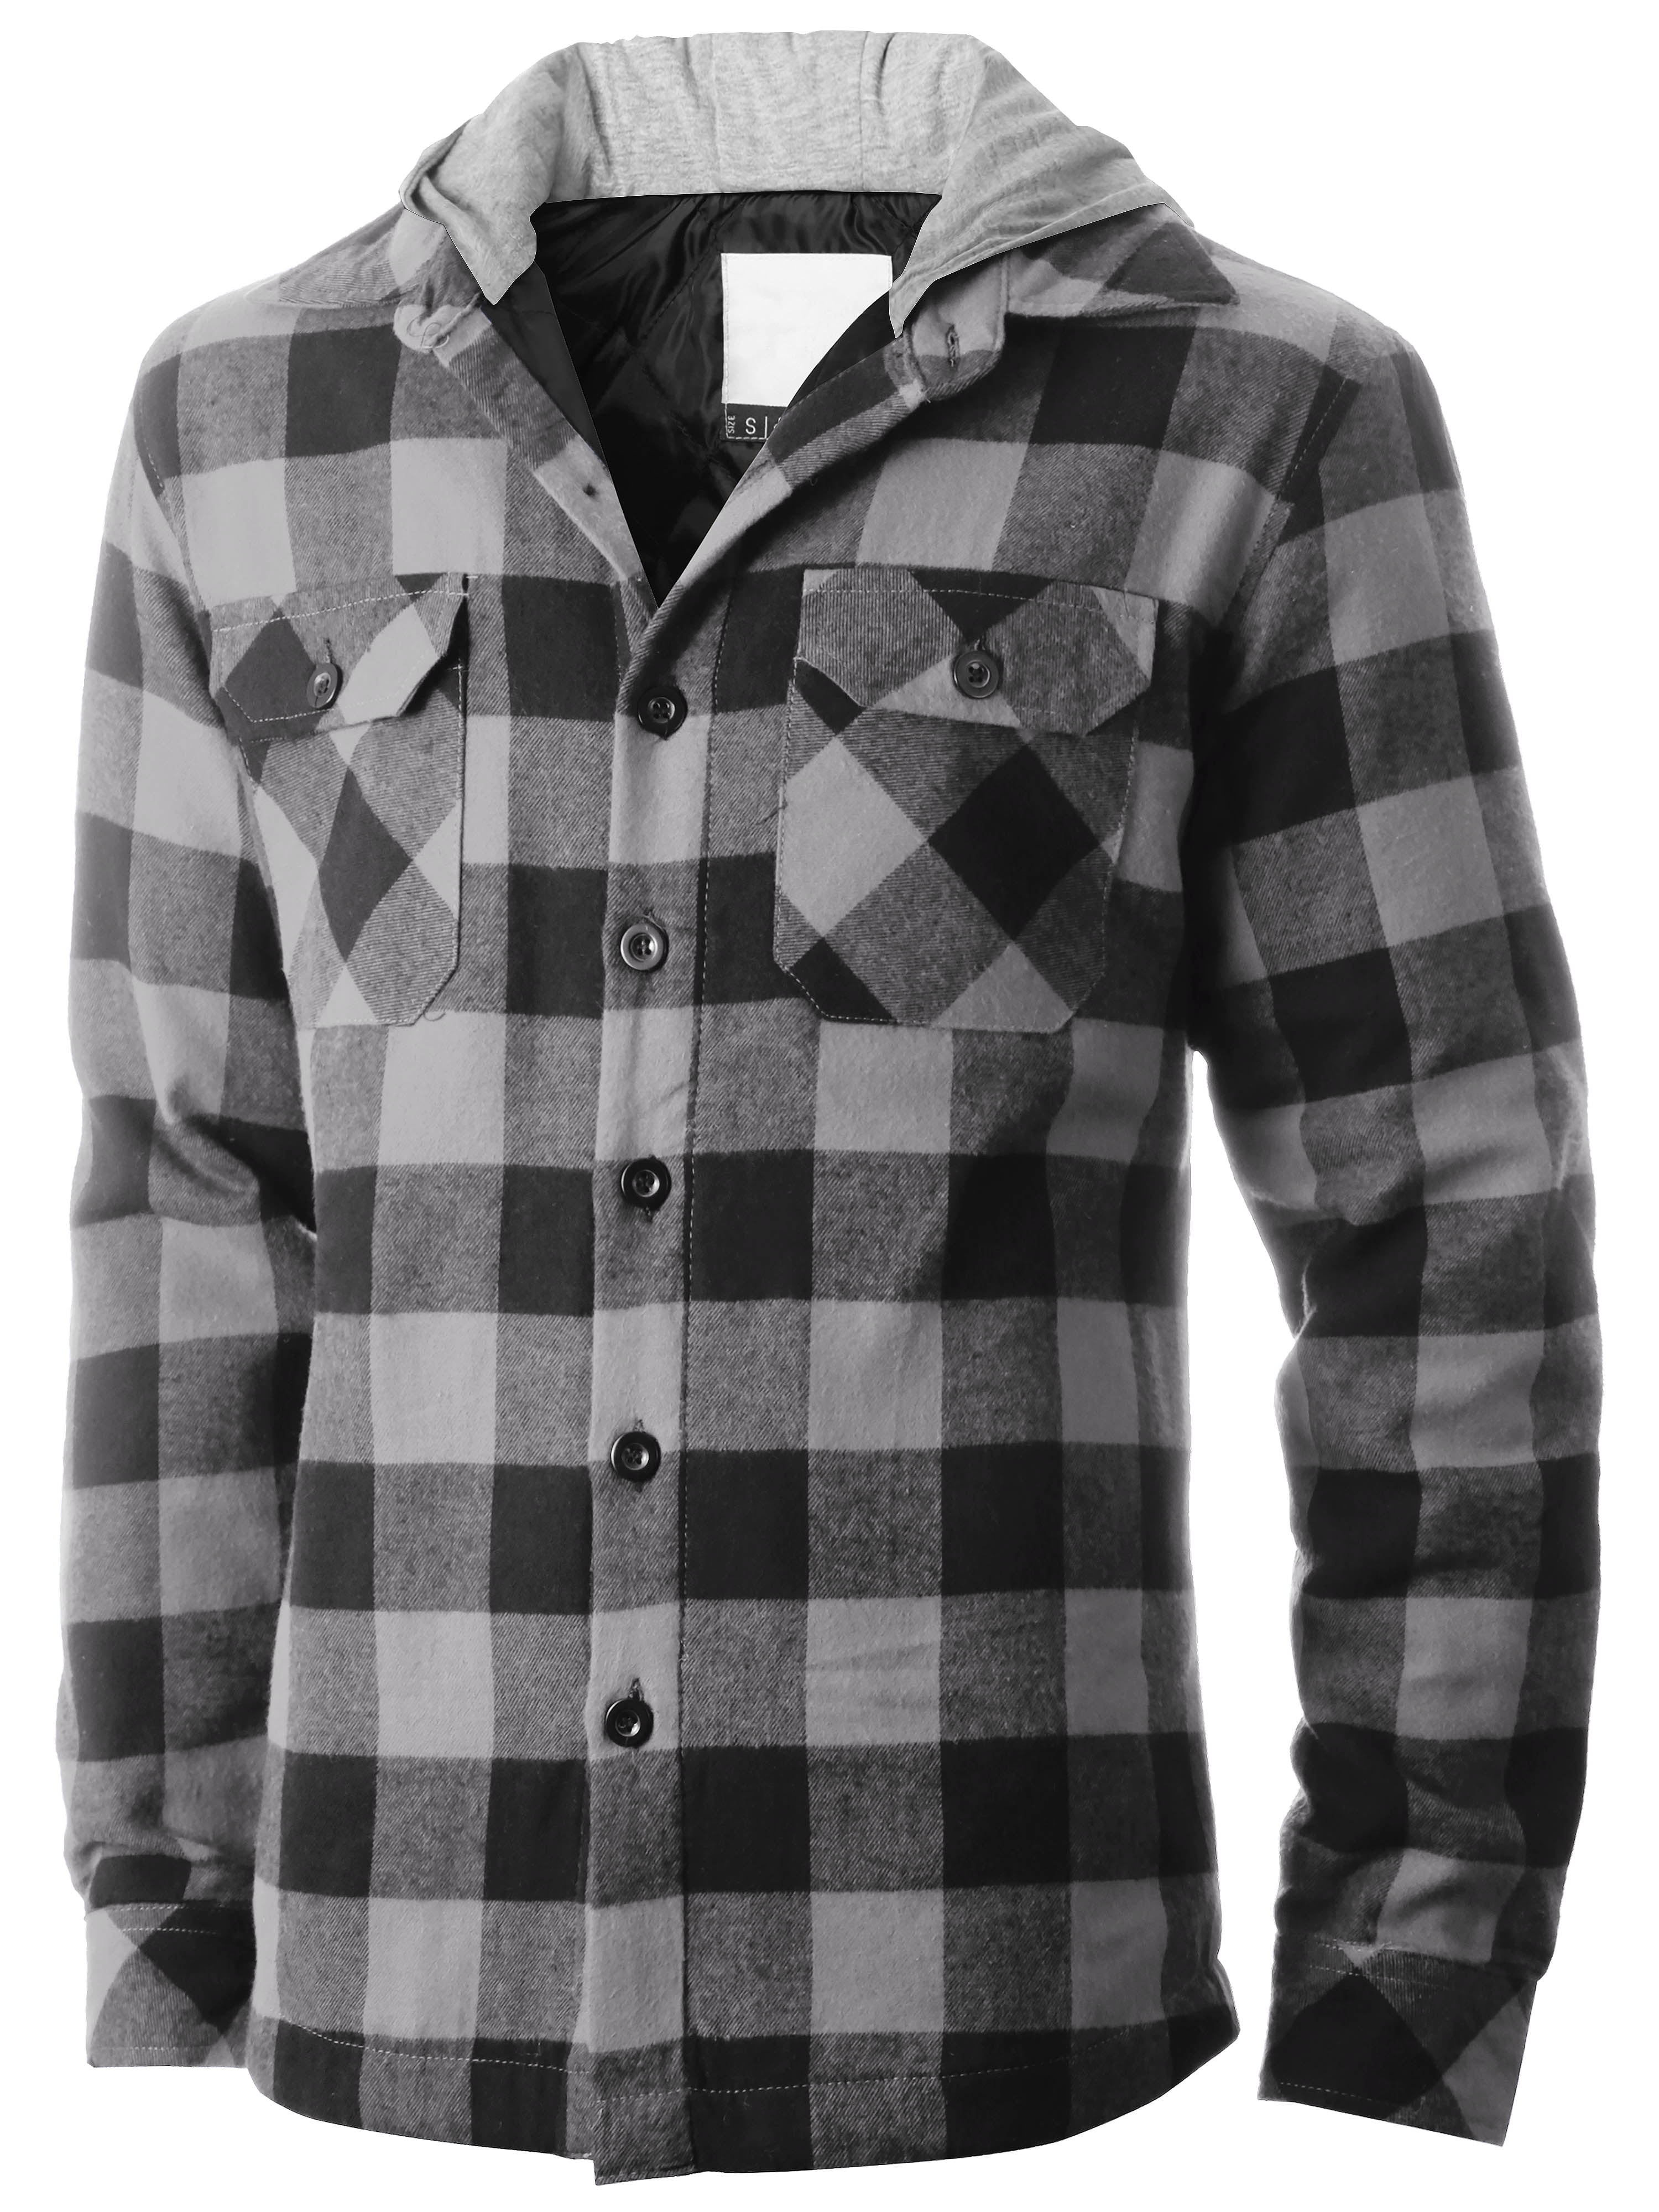 Ma Croix Mens Hooded Flannel Shirts Quilted Plaid Jacket - Walmart.com